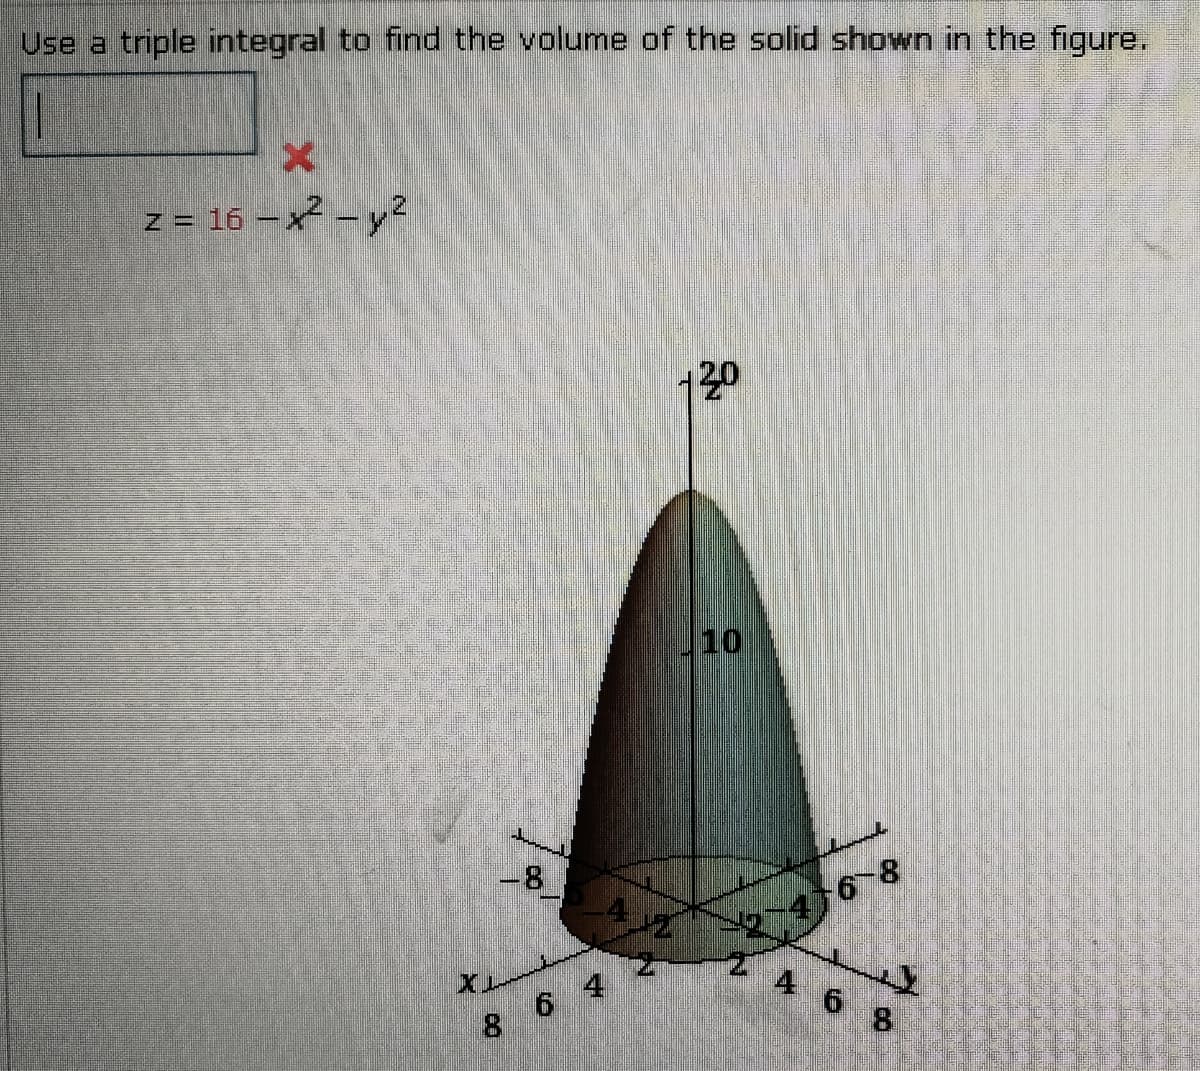 Use a triple integral to find the volume of the solid shown in the figure.
z = 16 – x² - y2
120
10
-8
68
X.
ZA 6 8
8 6 4
